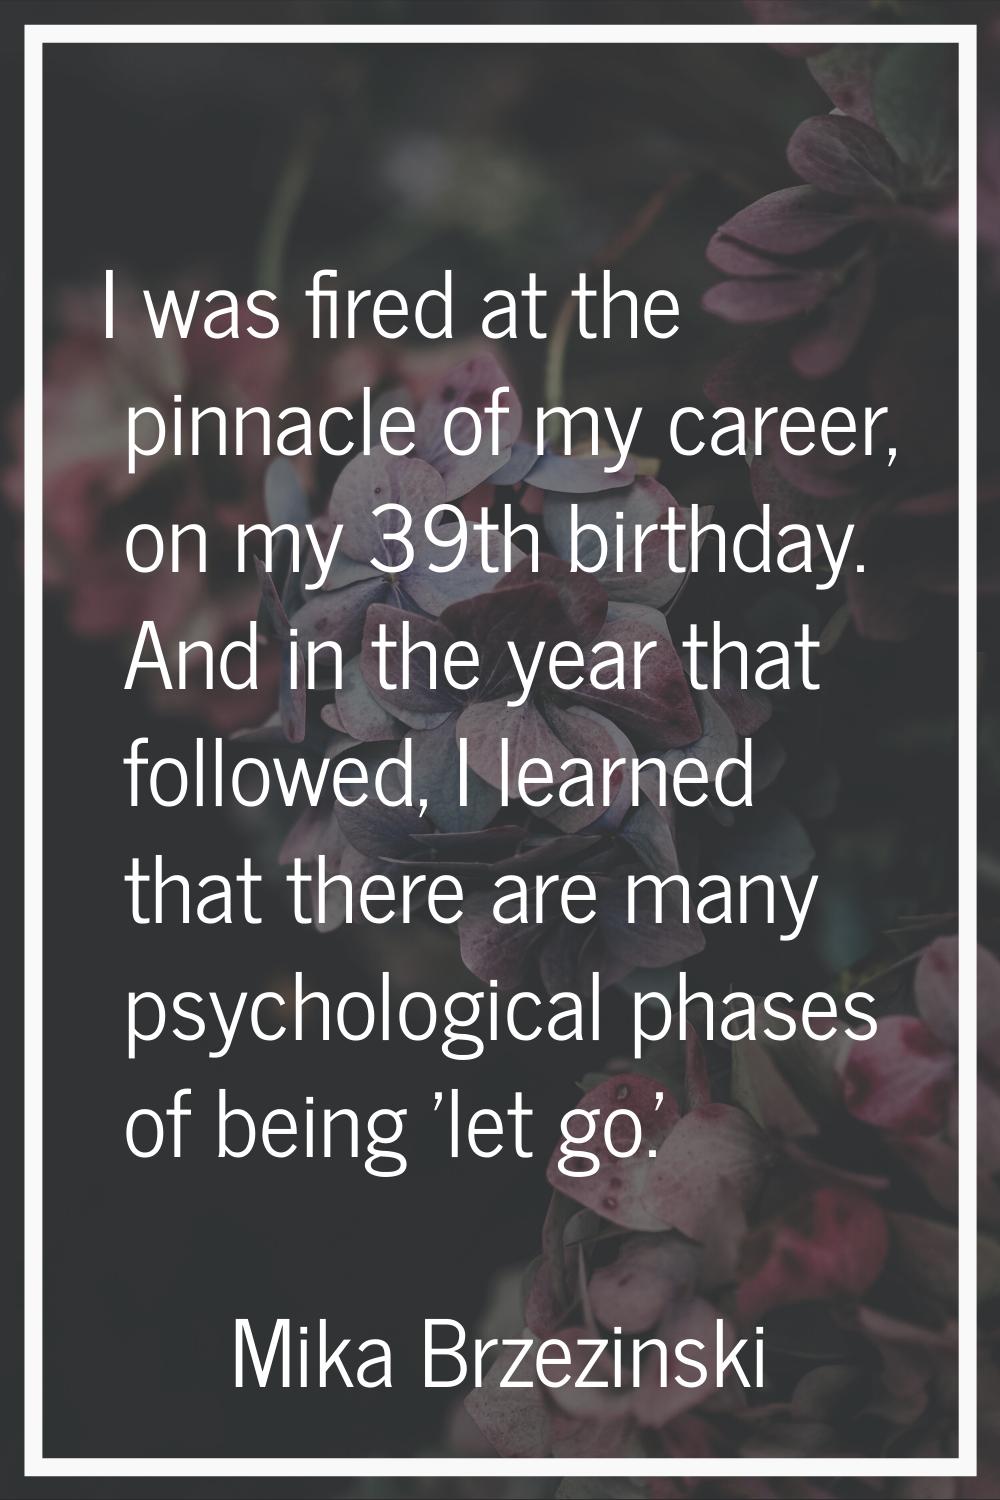 I was fired at the pinnacle of my career, on my 39th birthday. And in the year that followed, I lea